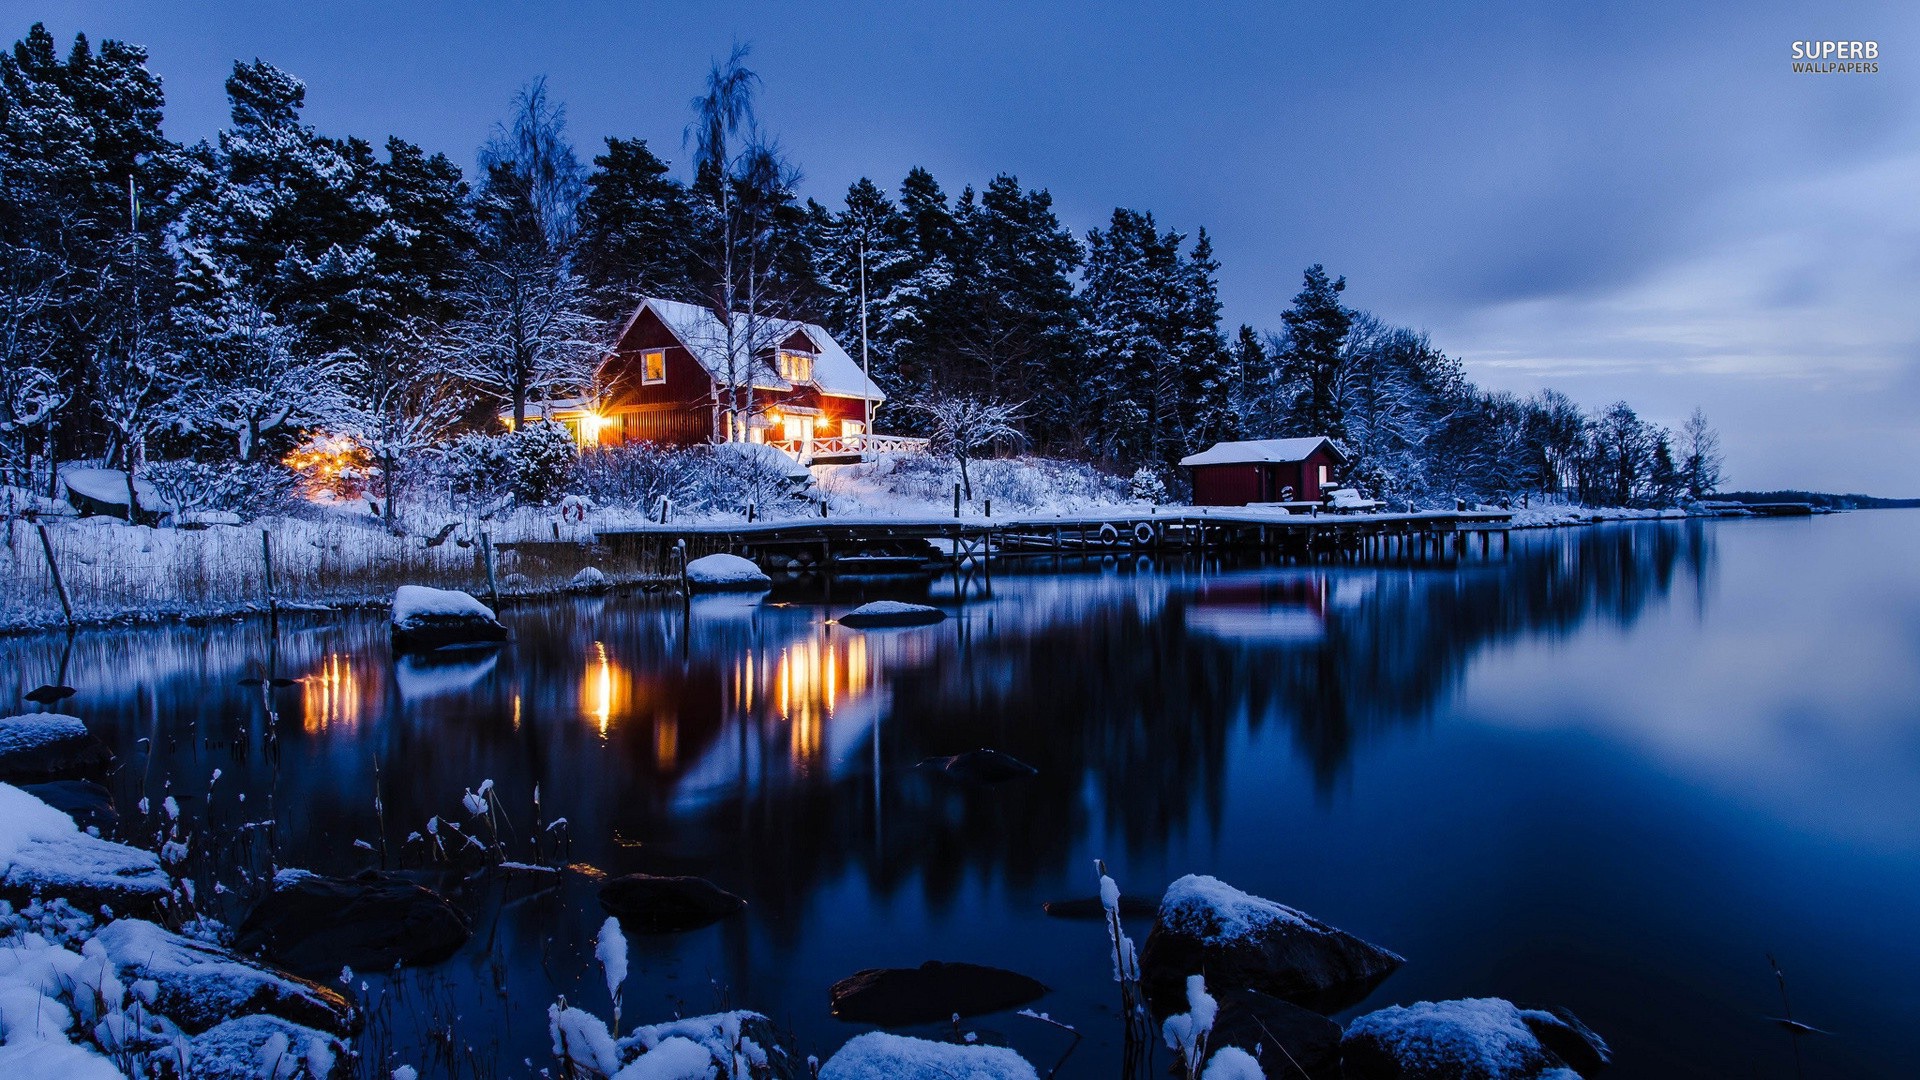 General 1920x1080 landscape lake cabin winter nature Norway house